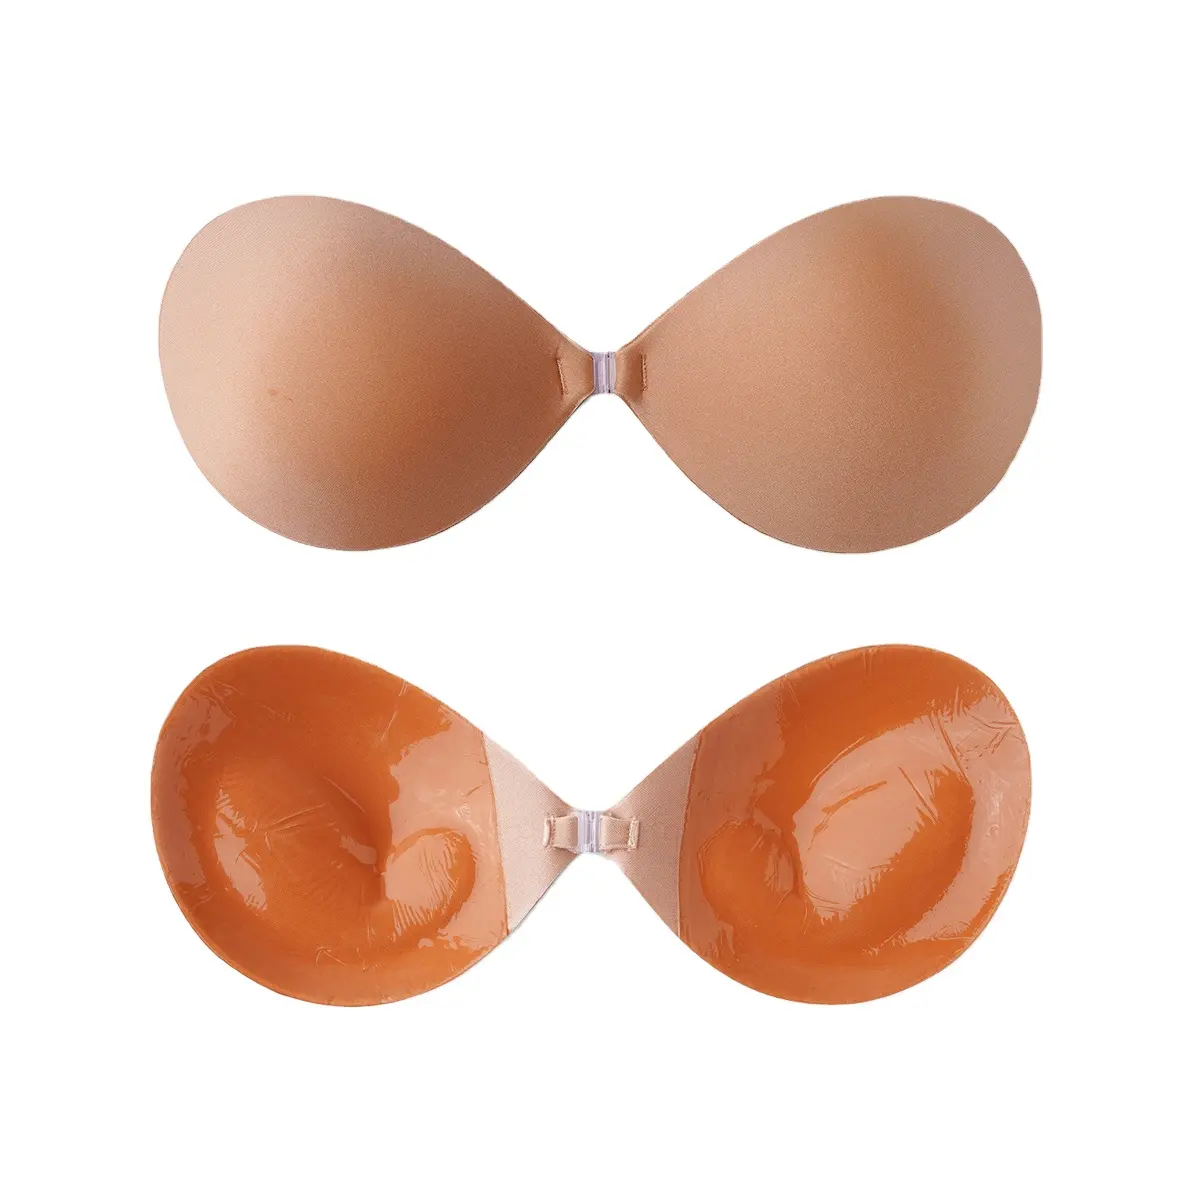 High Quality Strapless Silicone Adhesive Bra Magic Push-Up Invisible Lifting Bra Padded Backless Women's Bra